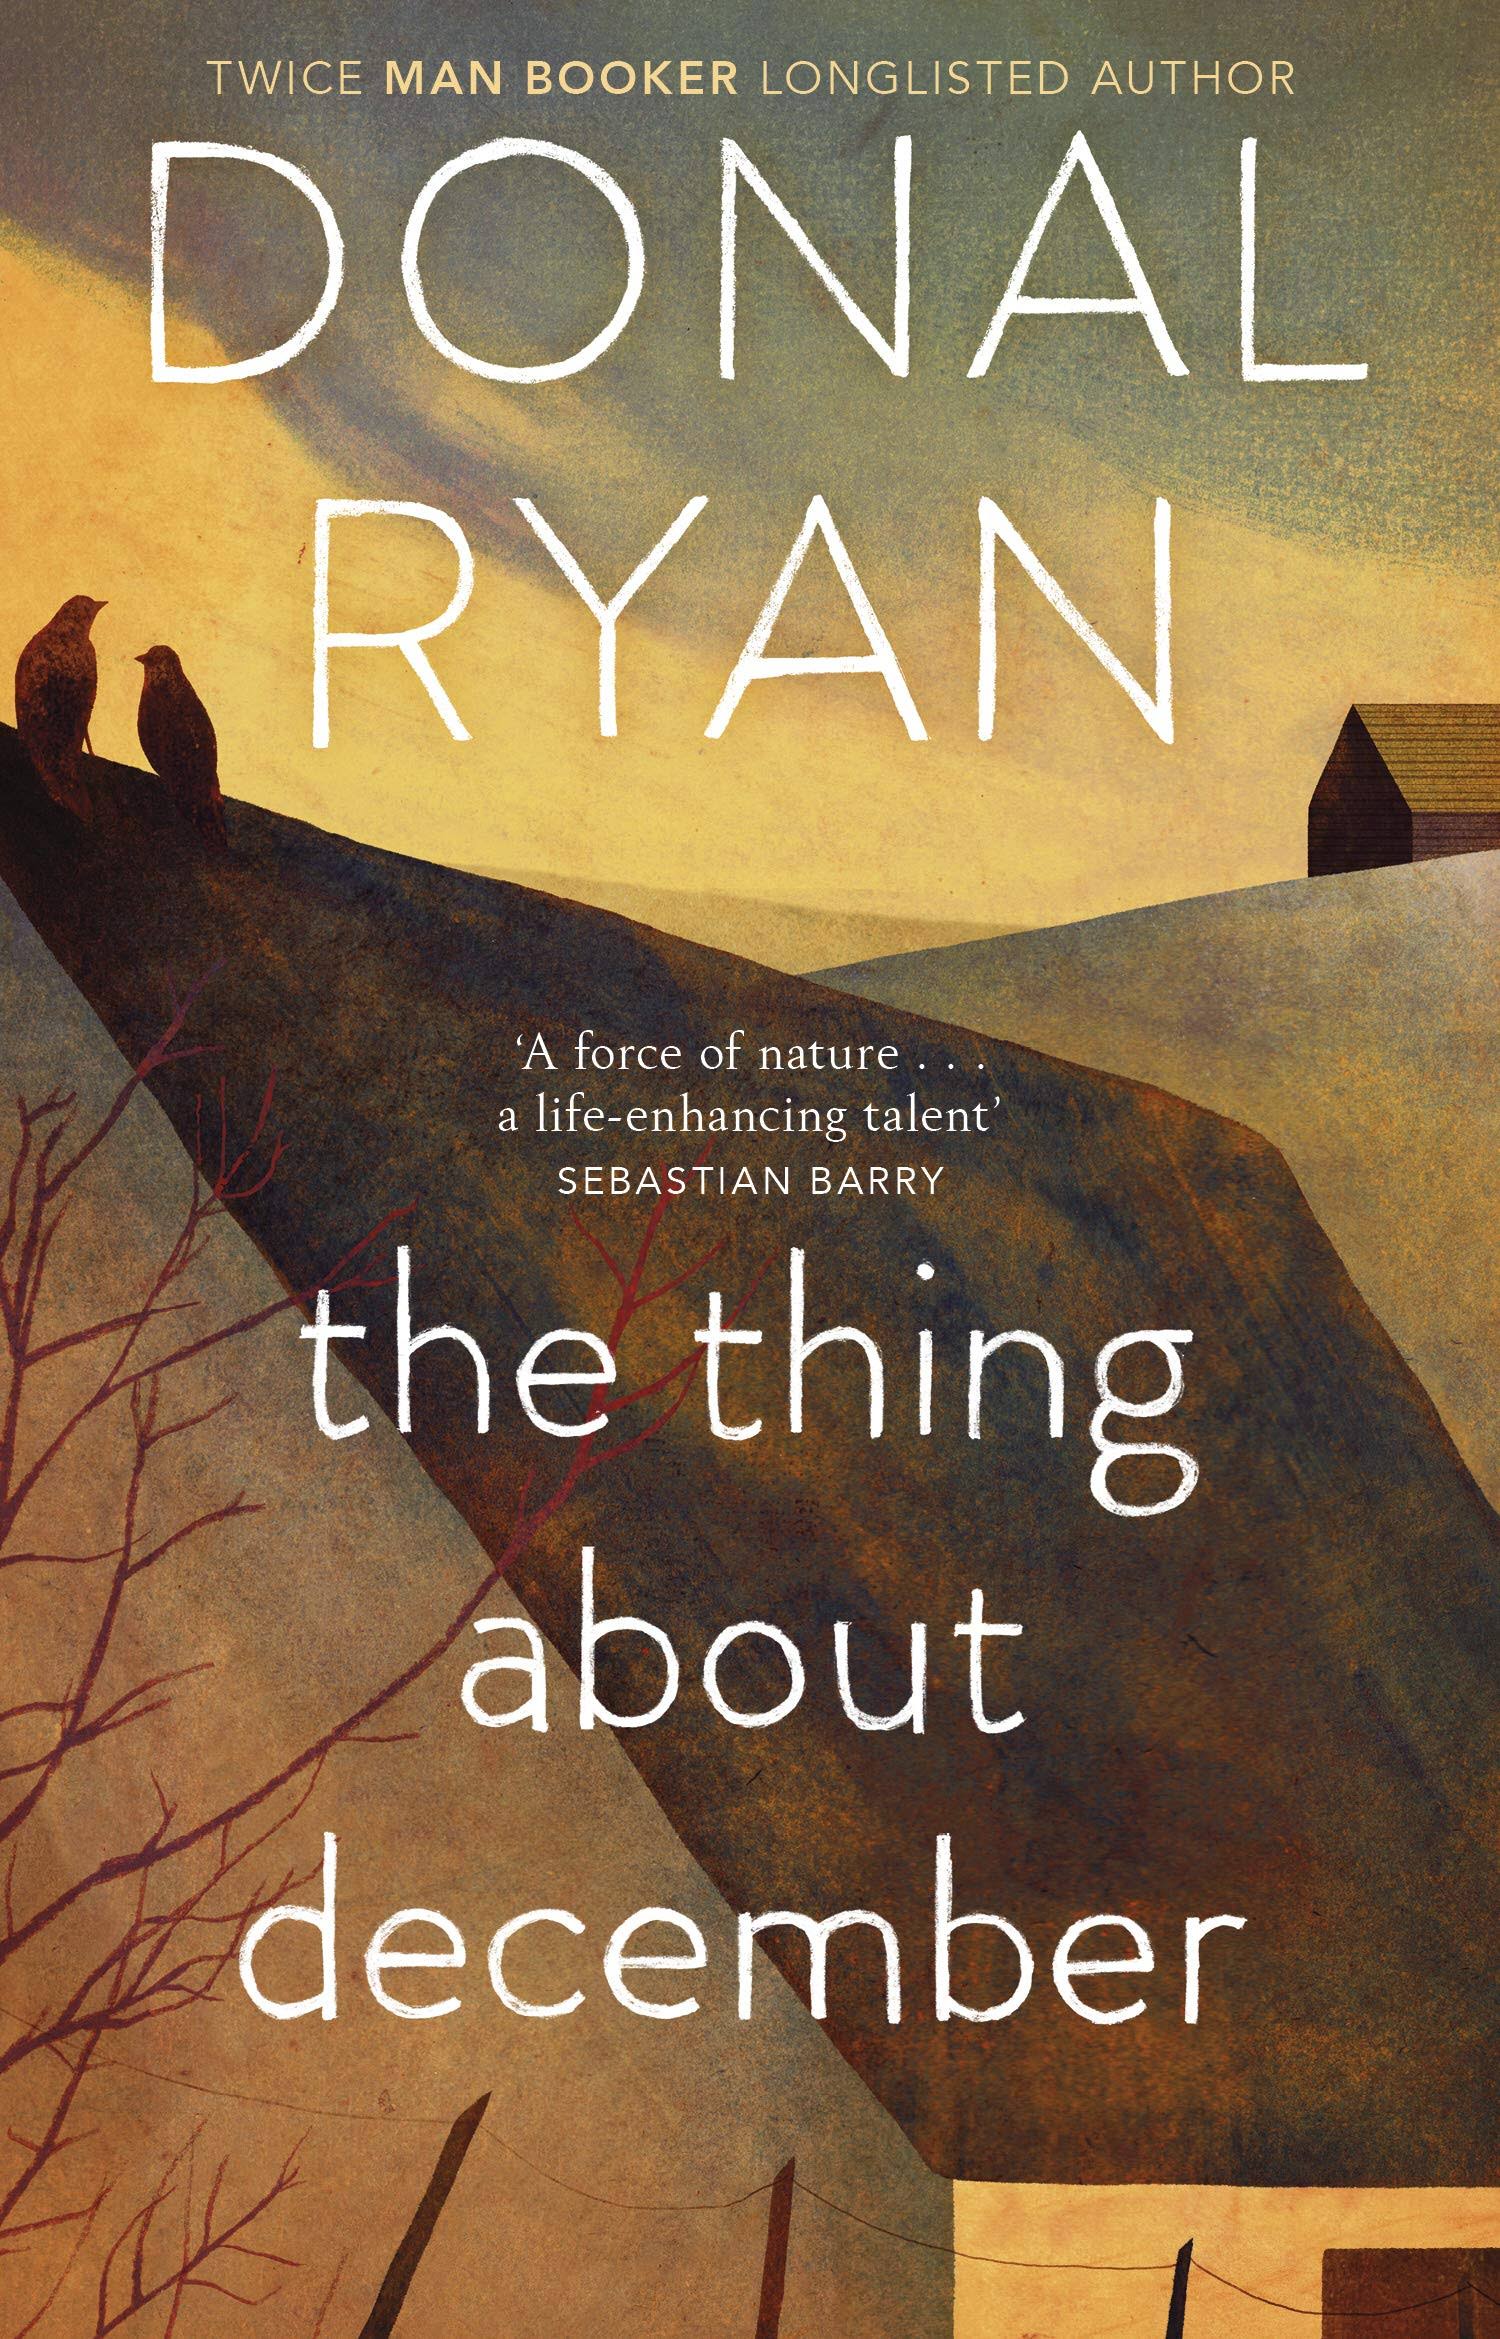 The Thing About December - Donal Ryan